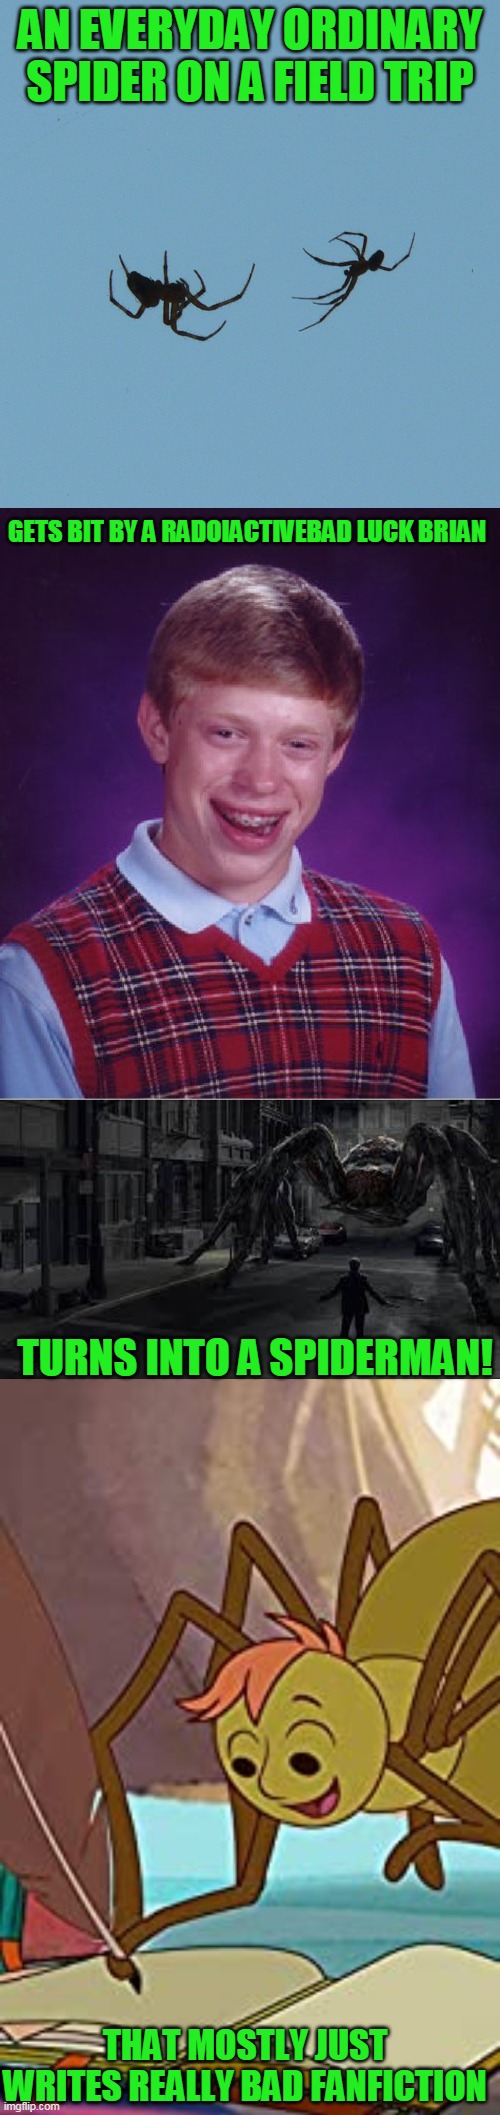 Told you my sense of humor has been lacking lately | AN EVERYDAY ORDINARY SPIDER ON A FIELD TRIP; GETS BIT BY A RADOIACTIVEBAD LUCK BRIAN; TURNS INTO A SPIDERMAN! THAT MOSTLY JUST WRITES REALLY BAD FANFICTION | image tagged in memes,bad luck brian,one f ing mistake,not remaking it | made w/ Imgflip meme maker